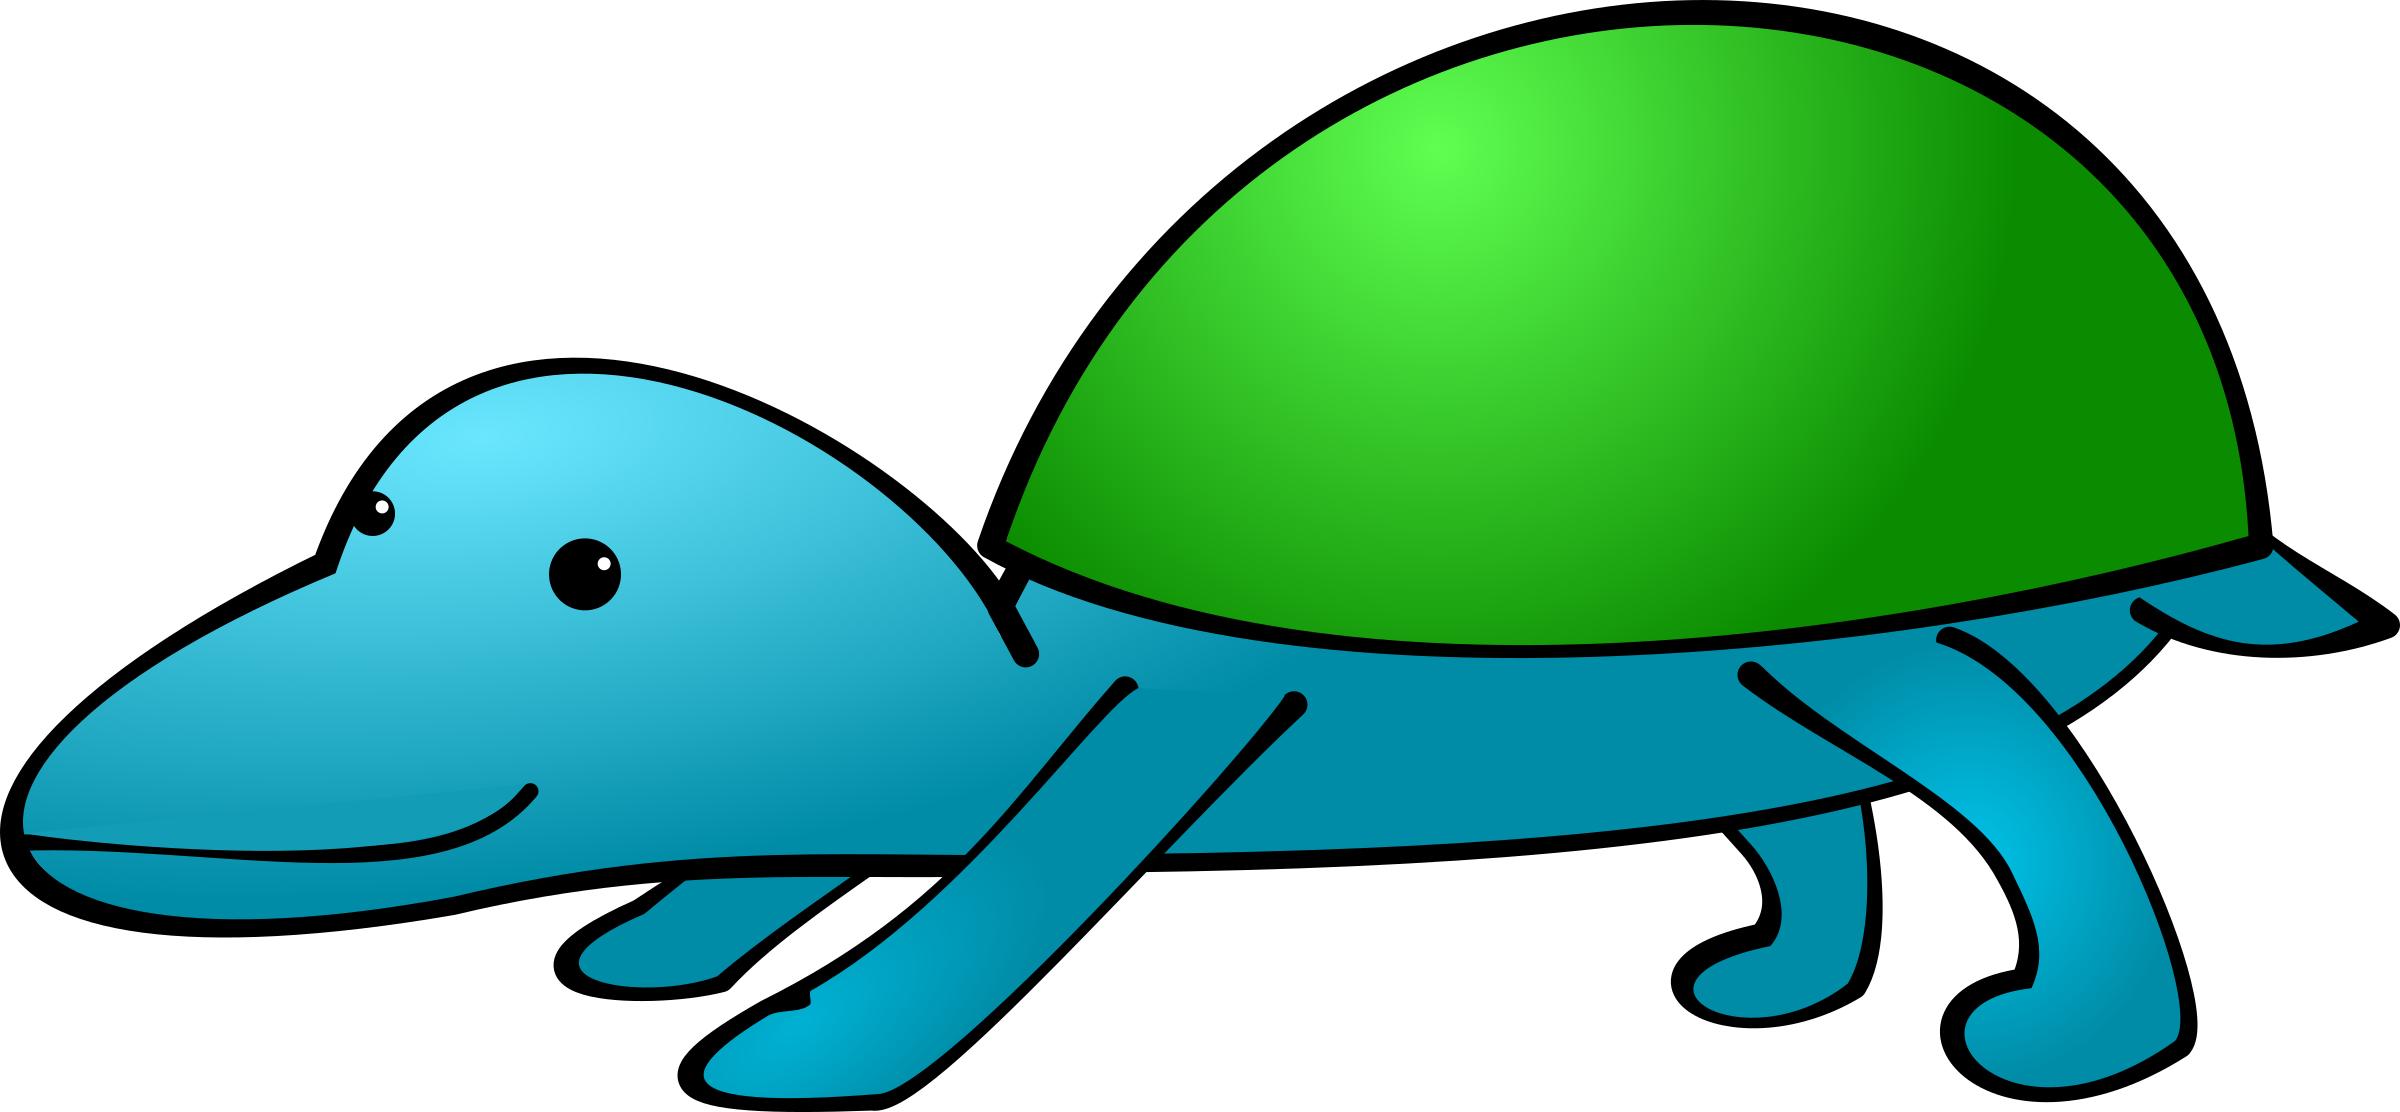 Fictional animal with shell png